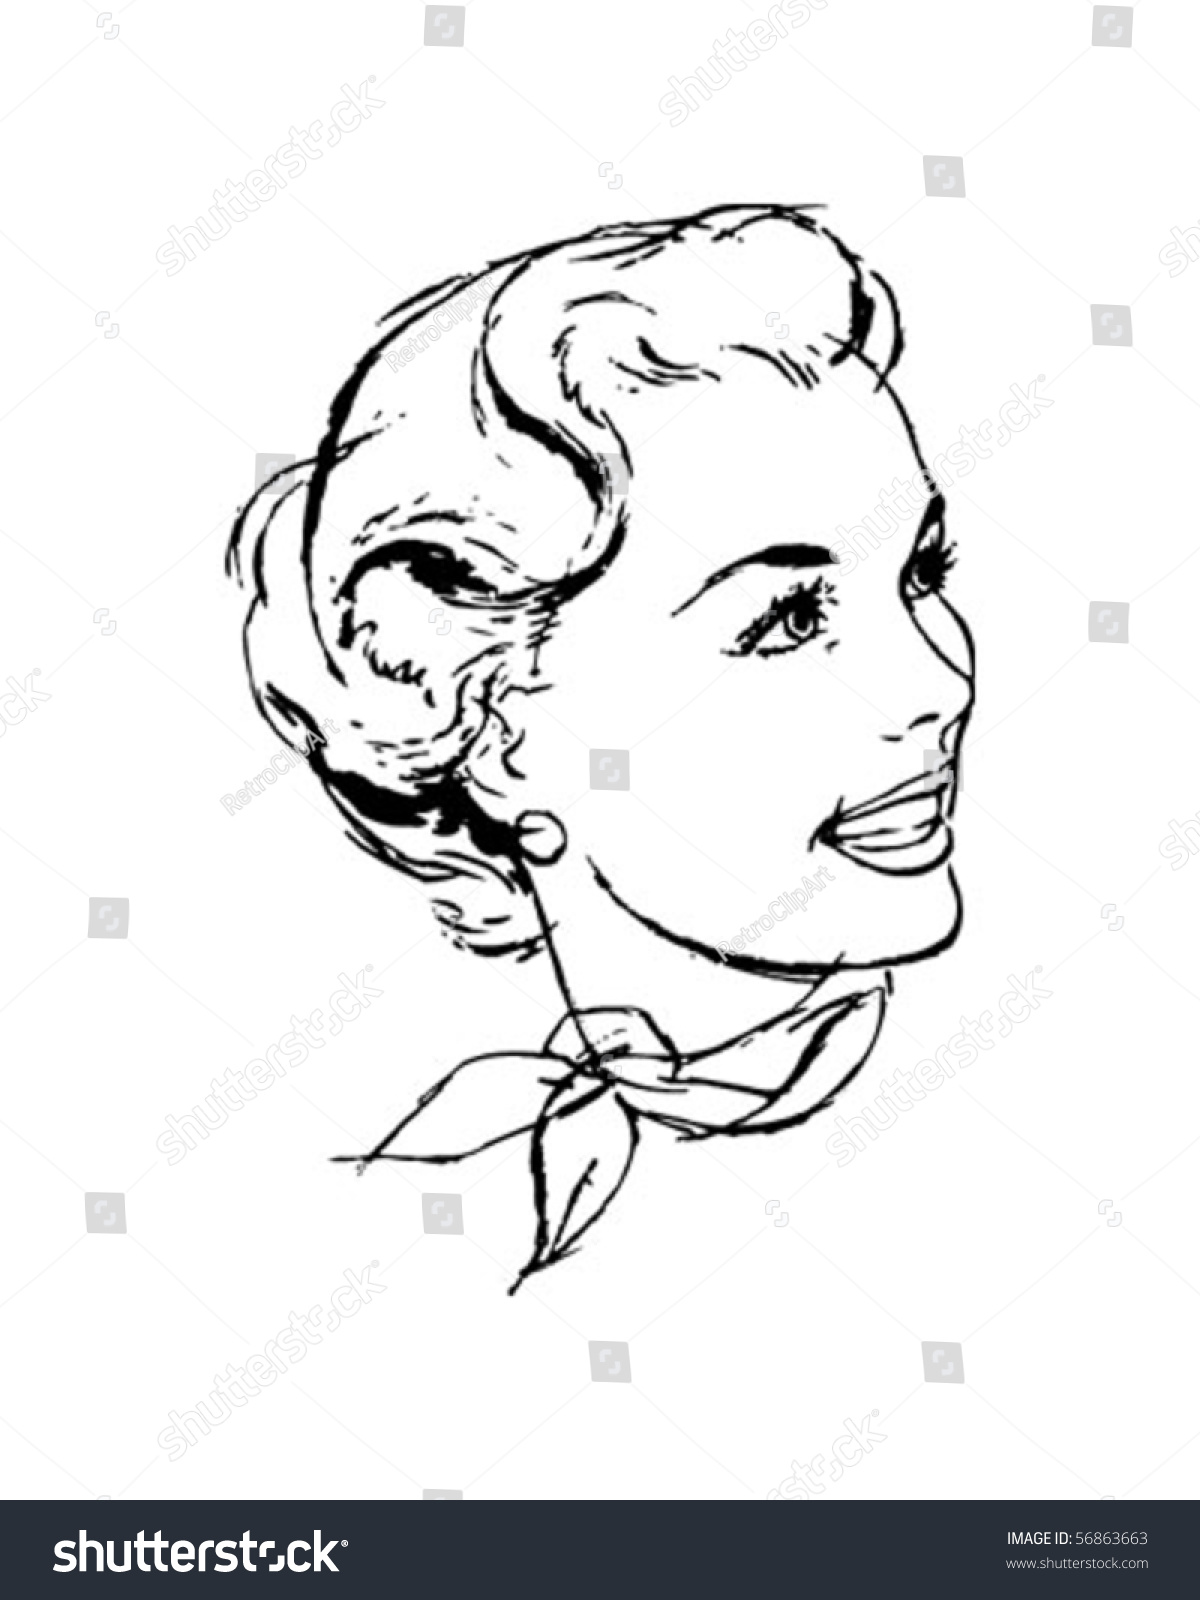 SVG of Woman With Scarf - Retro Clip Art svg